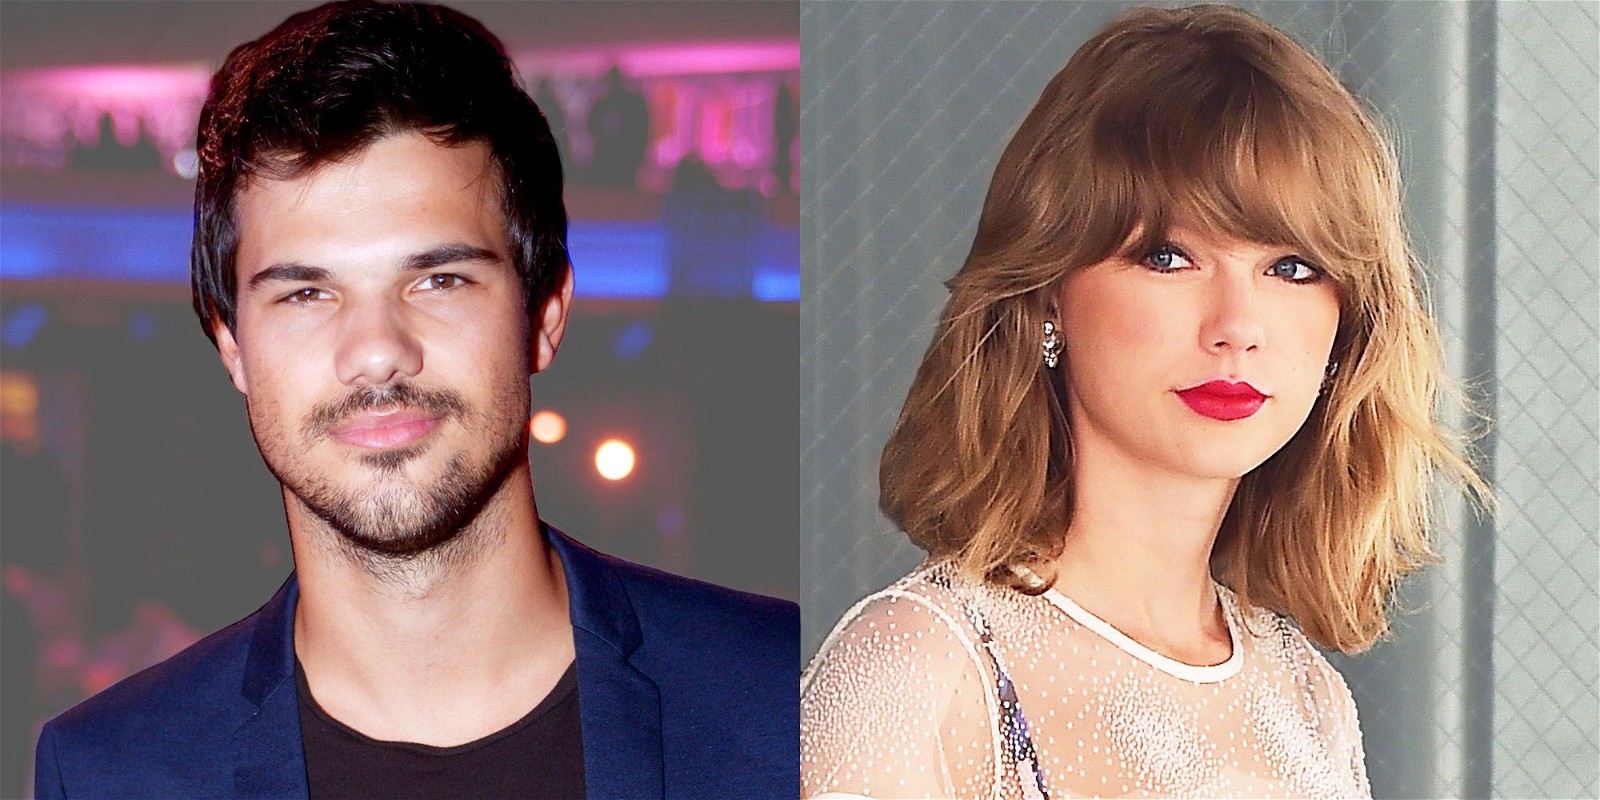 Taylor Lautner and Taylor Swift